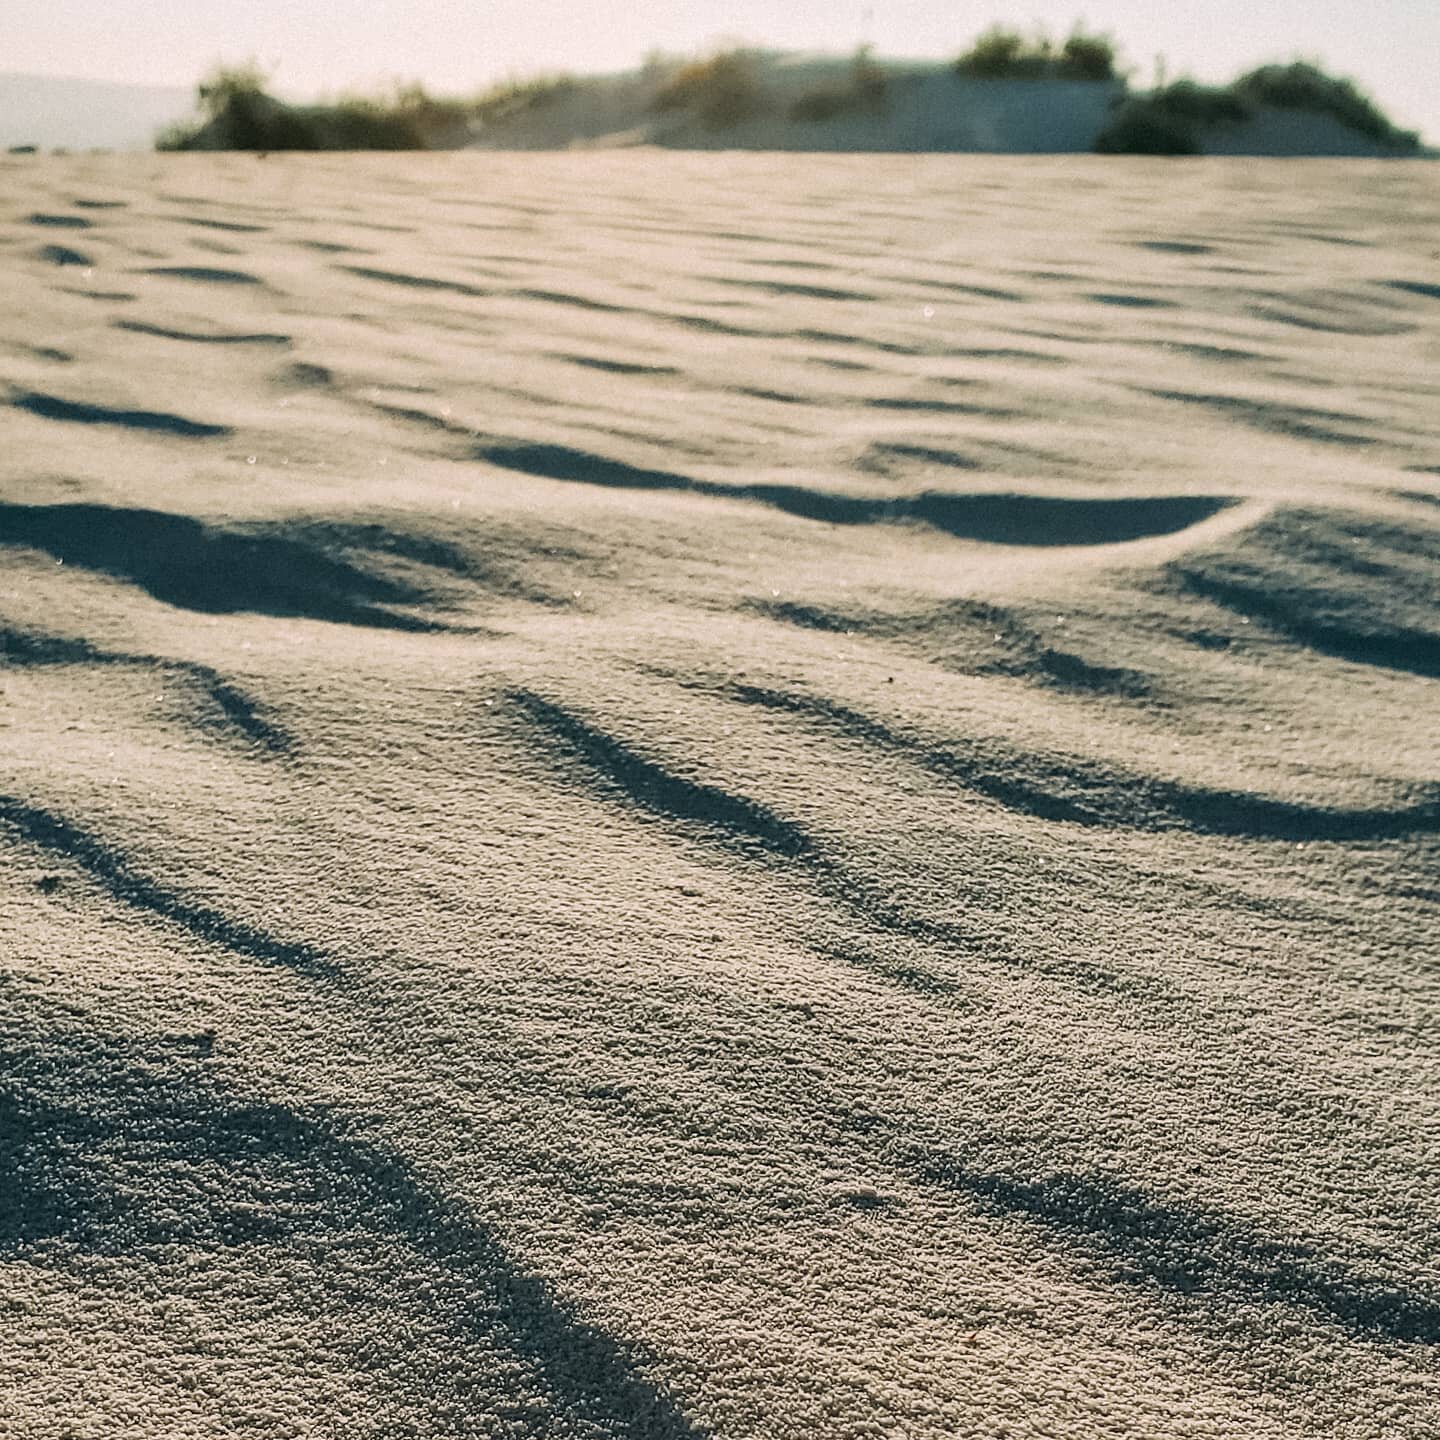 WHITE SANDS NATIONAL PARK 👣
Home of the world's largest - not sand, but gypsum - dune field.
💫 10,000 years ago this arid desert was actually lush grassland and salt lakes. The gypsum is a remnant of the former lakes.
💫 One of the most famous stor